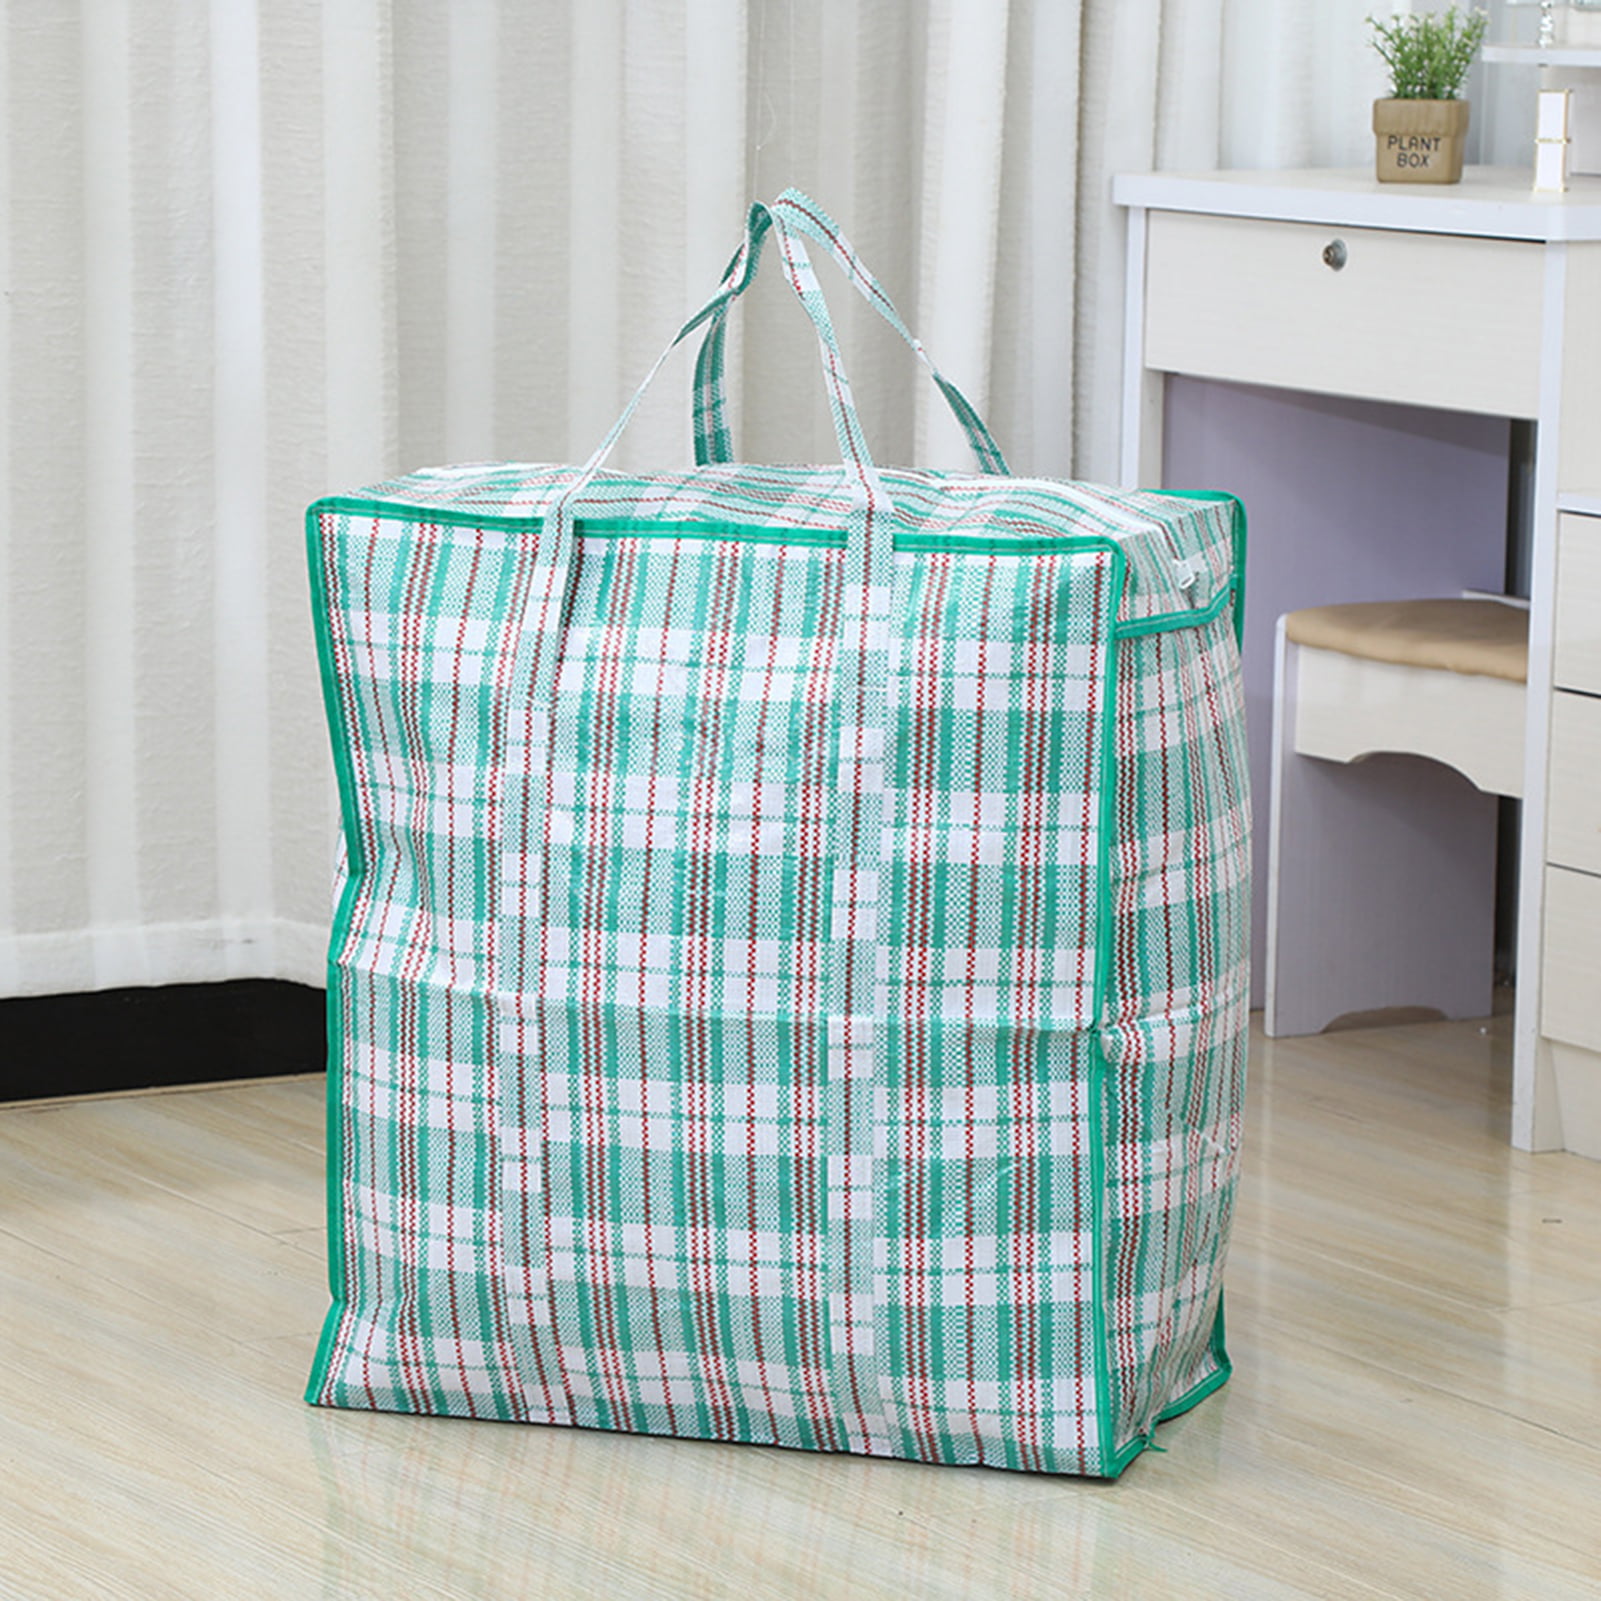 Large Storage Bags with Zipper and Handles for Travel, Laundry, Shopping,  and Moving Bl19858 - China Bag and Luggage Capacity Bag price